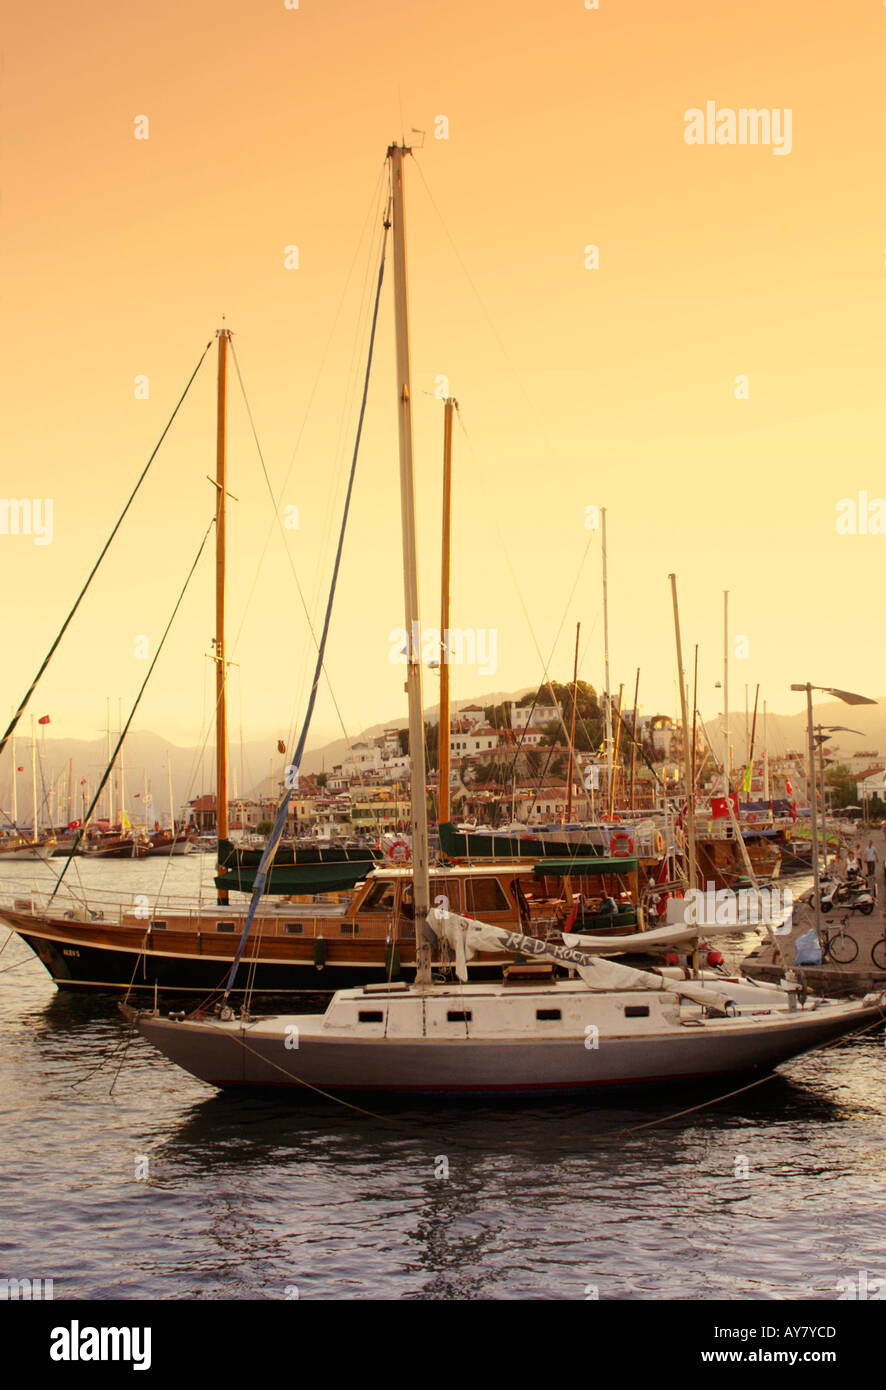 Harbour and boats at sunset in Marmaris, TURKEY Stock Photo